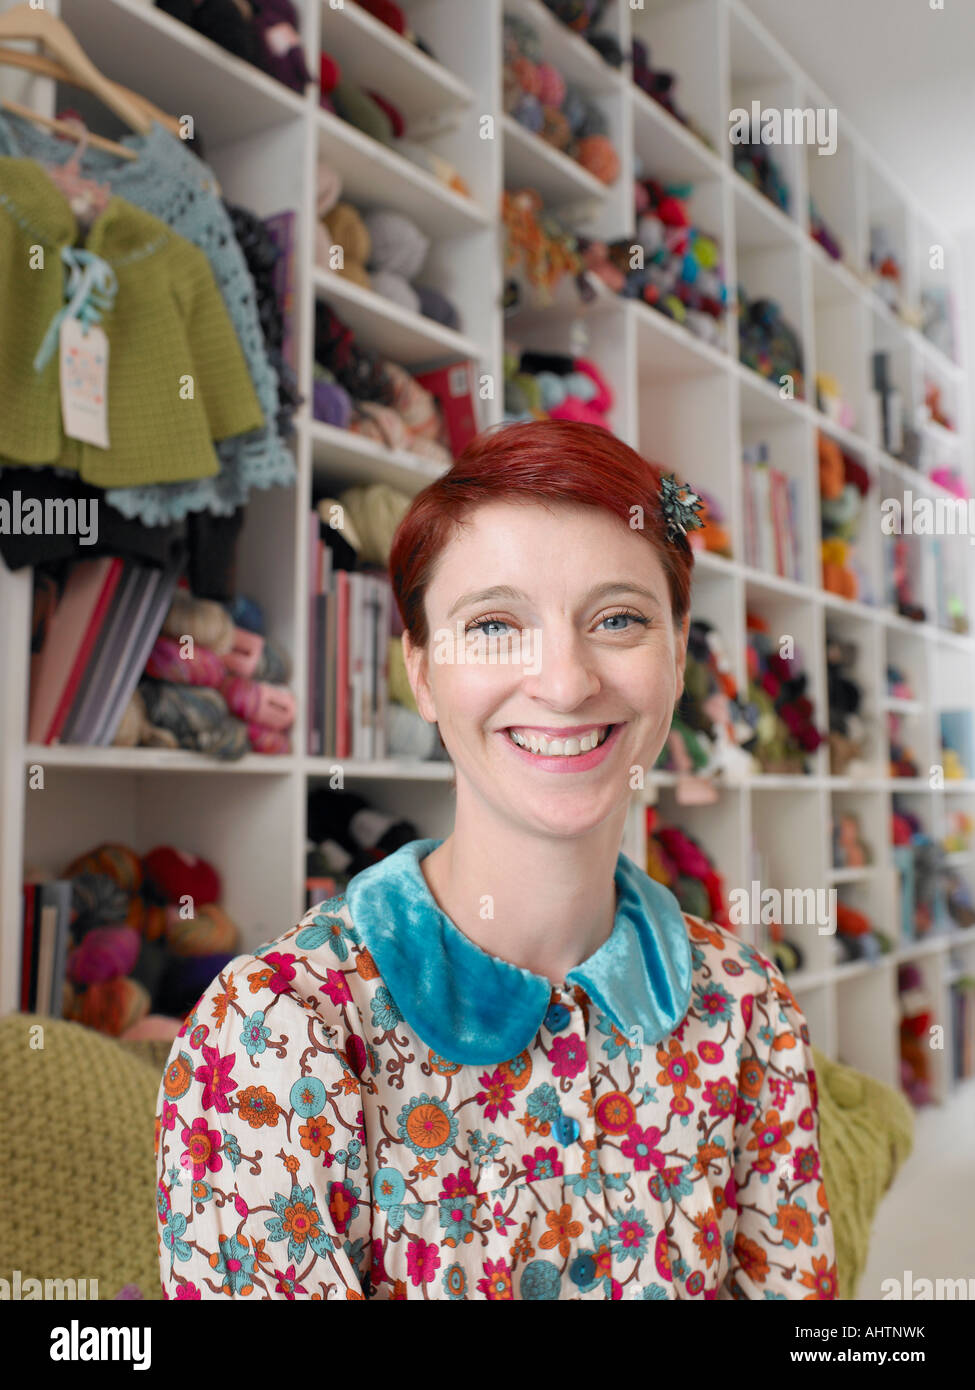 Woman sitting in craft shop, smiling, portrait, close-up Stock Photo